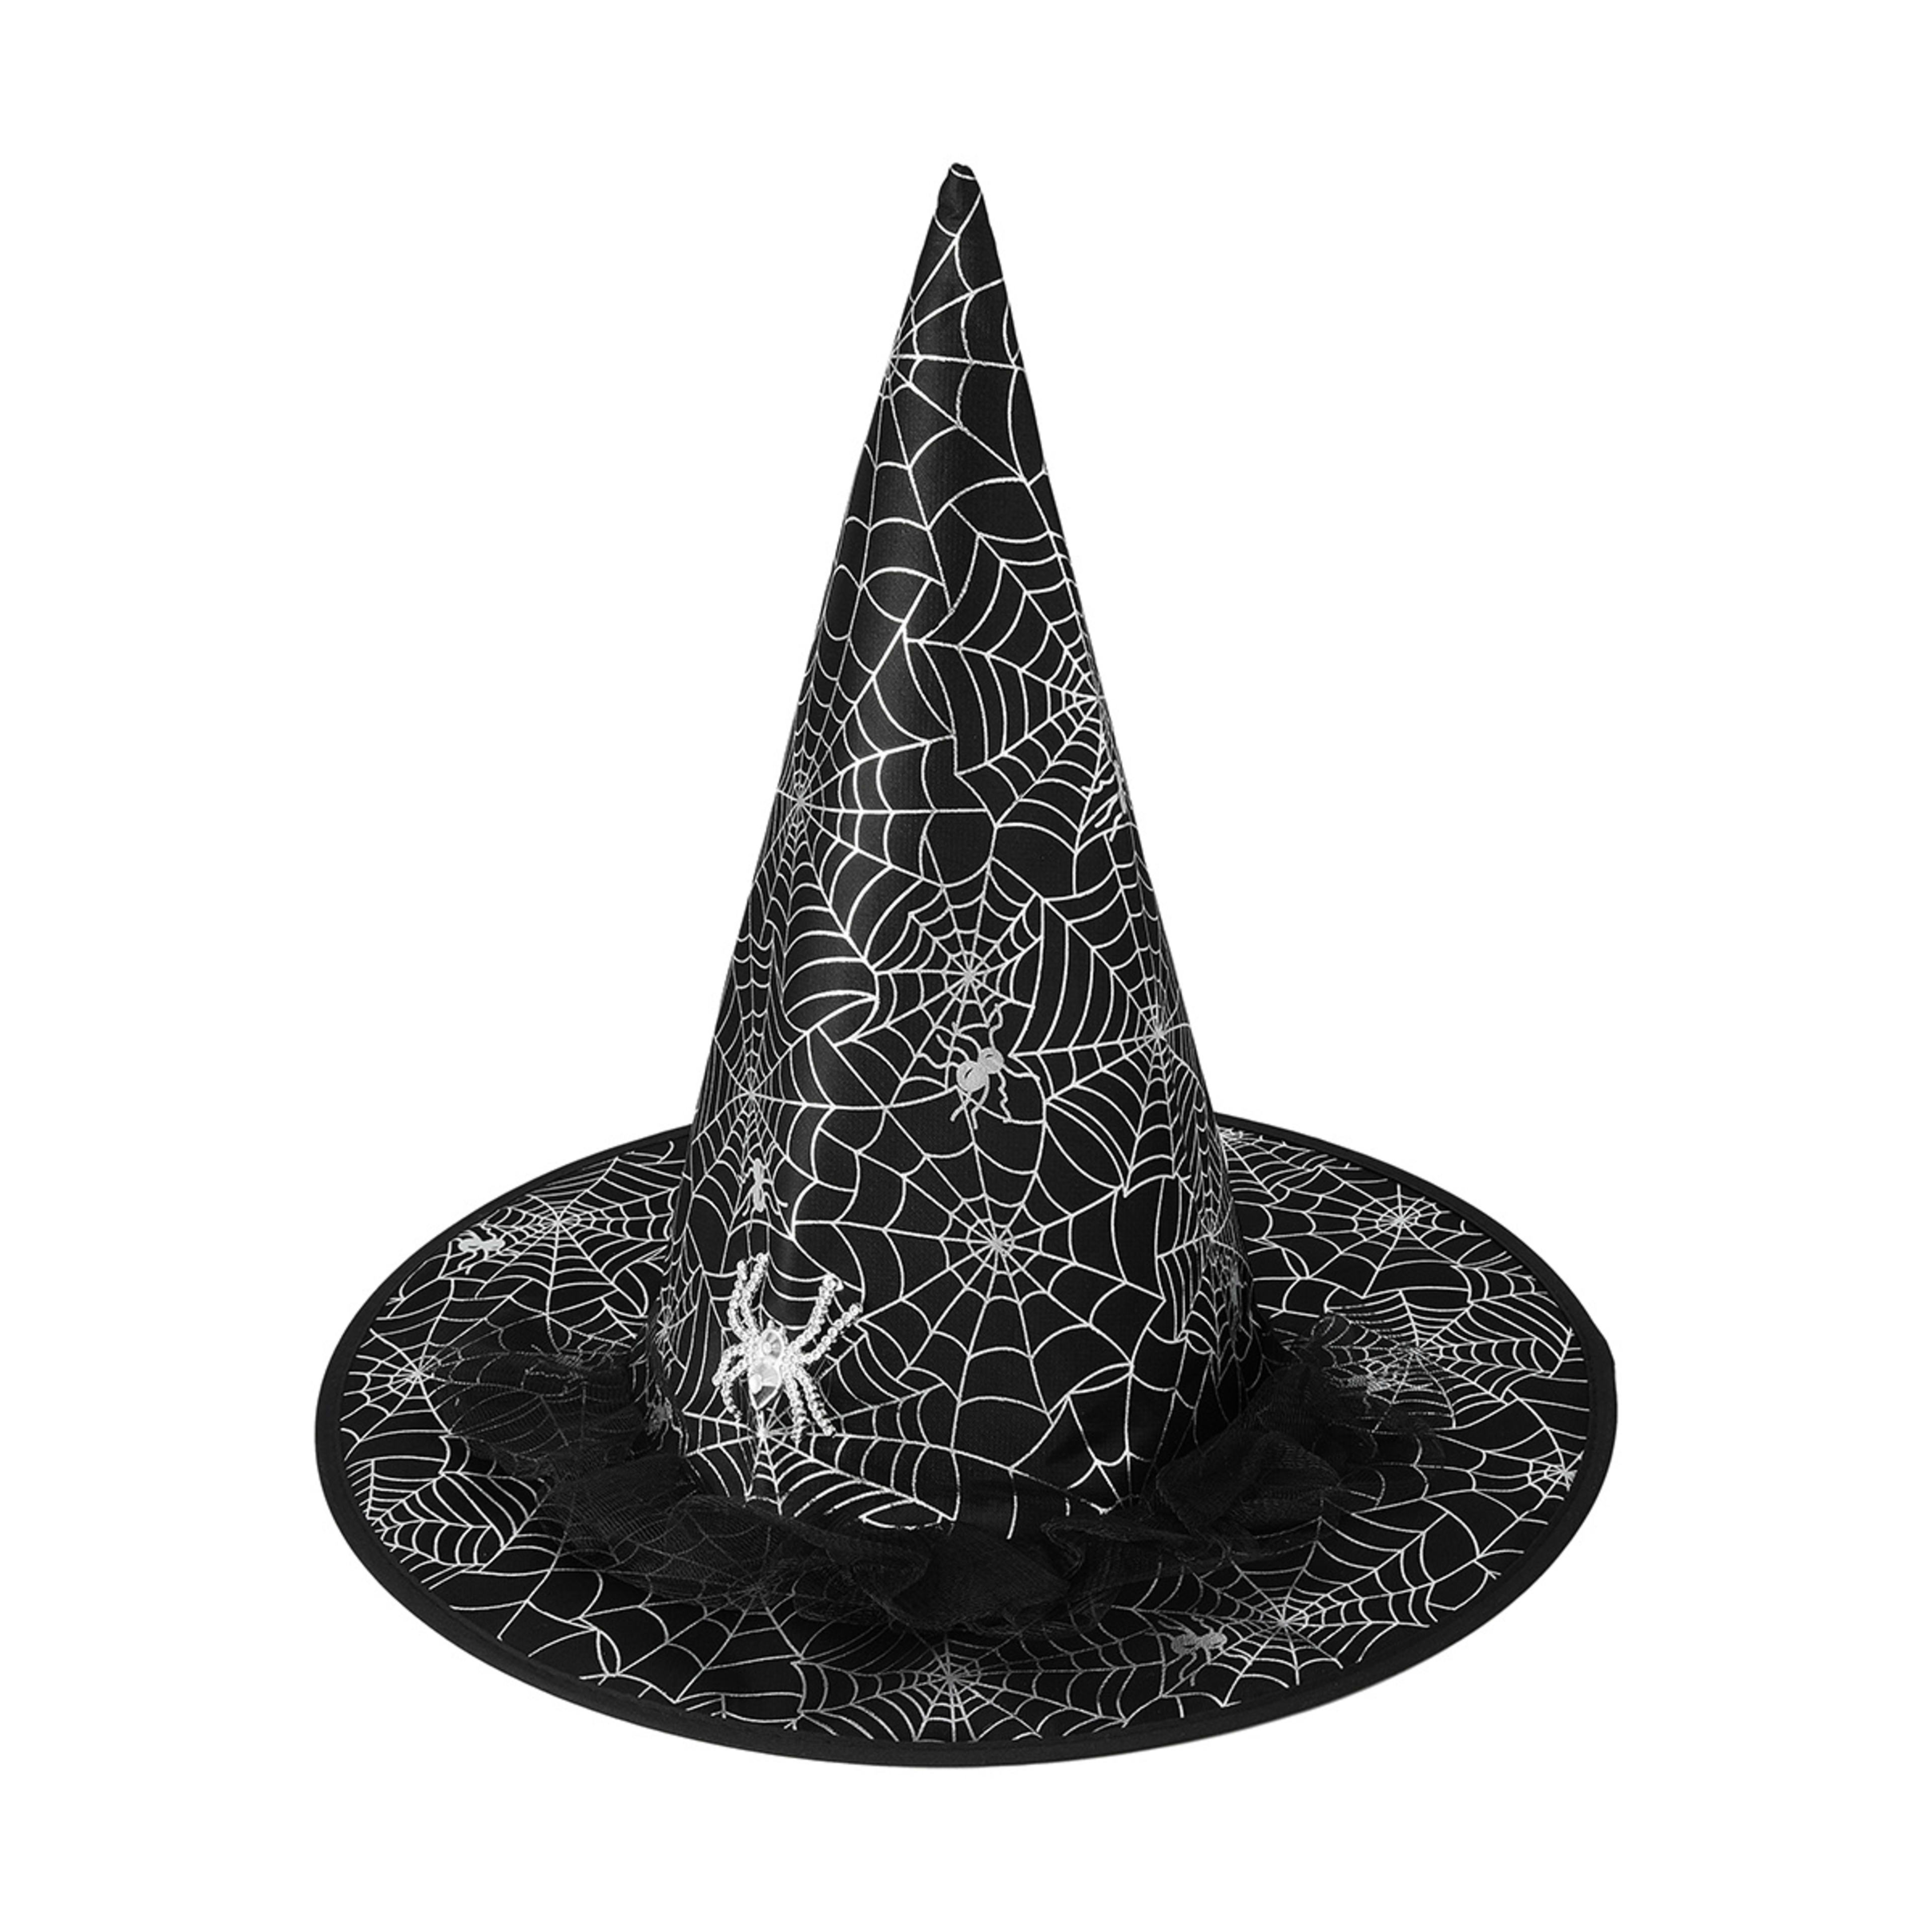 Witches Hat - Ages 5 - Kmart